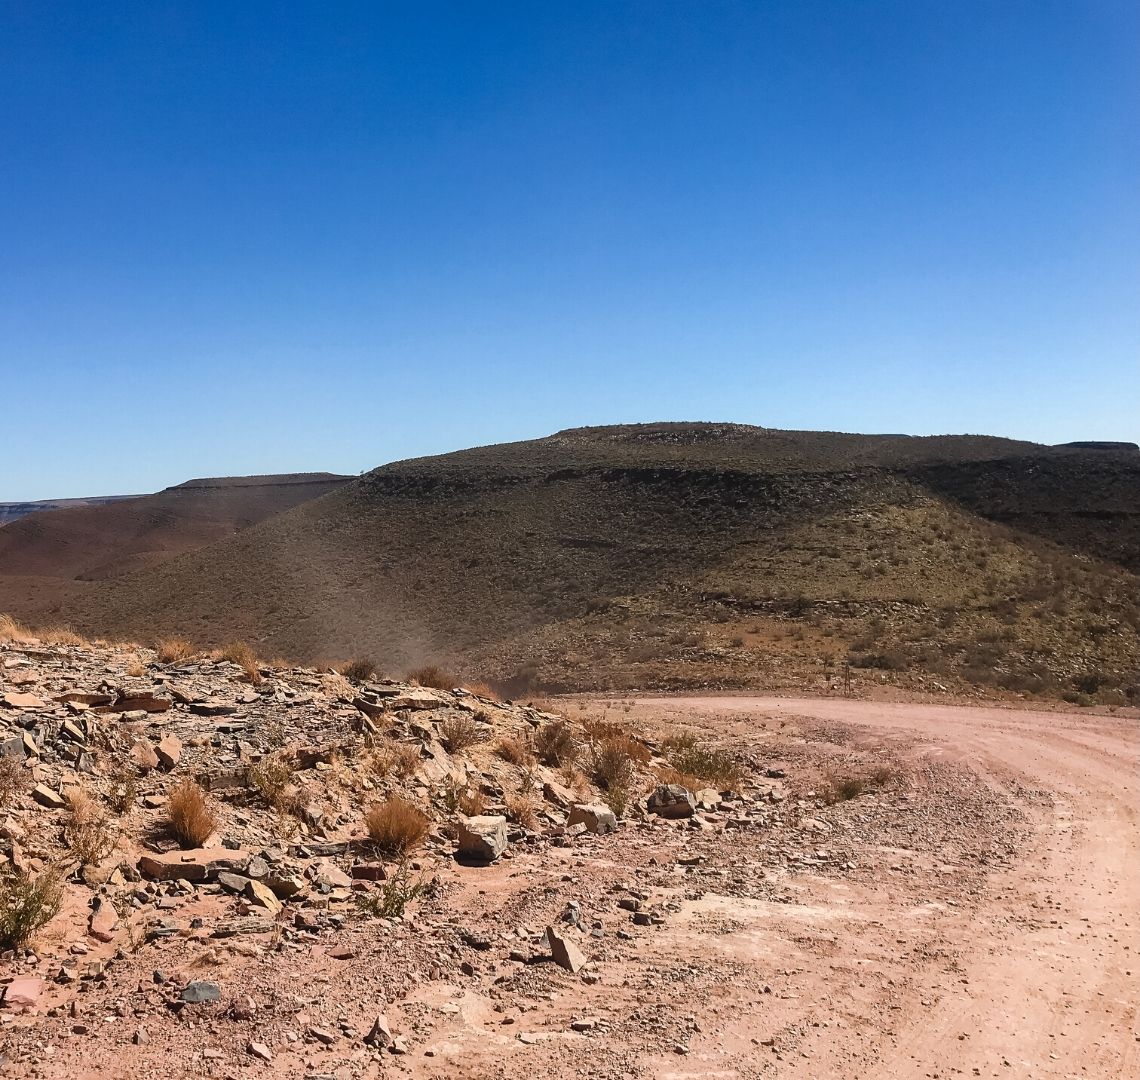 5 Things You Need To Know Before A Self-Drive Safari In Namibia - dust is kicked up behind a (hidden) car in front of us on a red dusty gravel track. The sky is completely blue. 